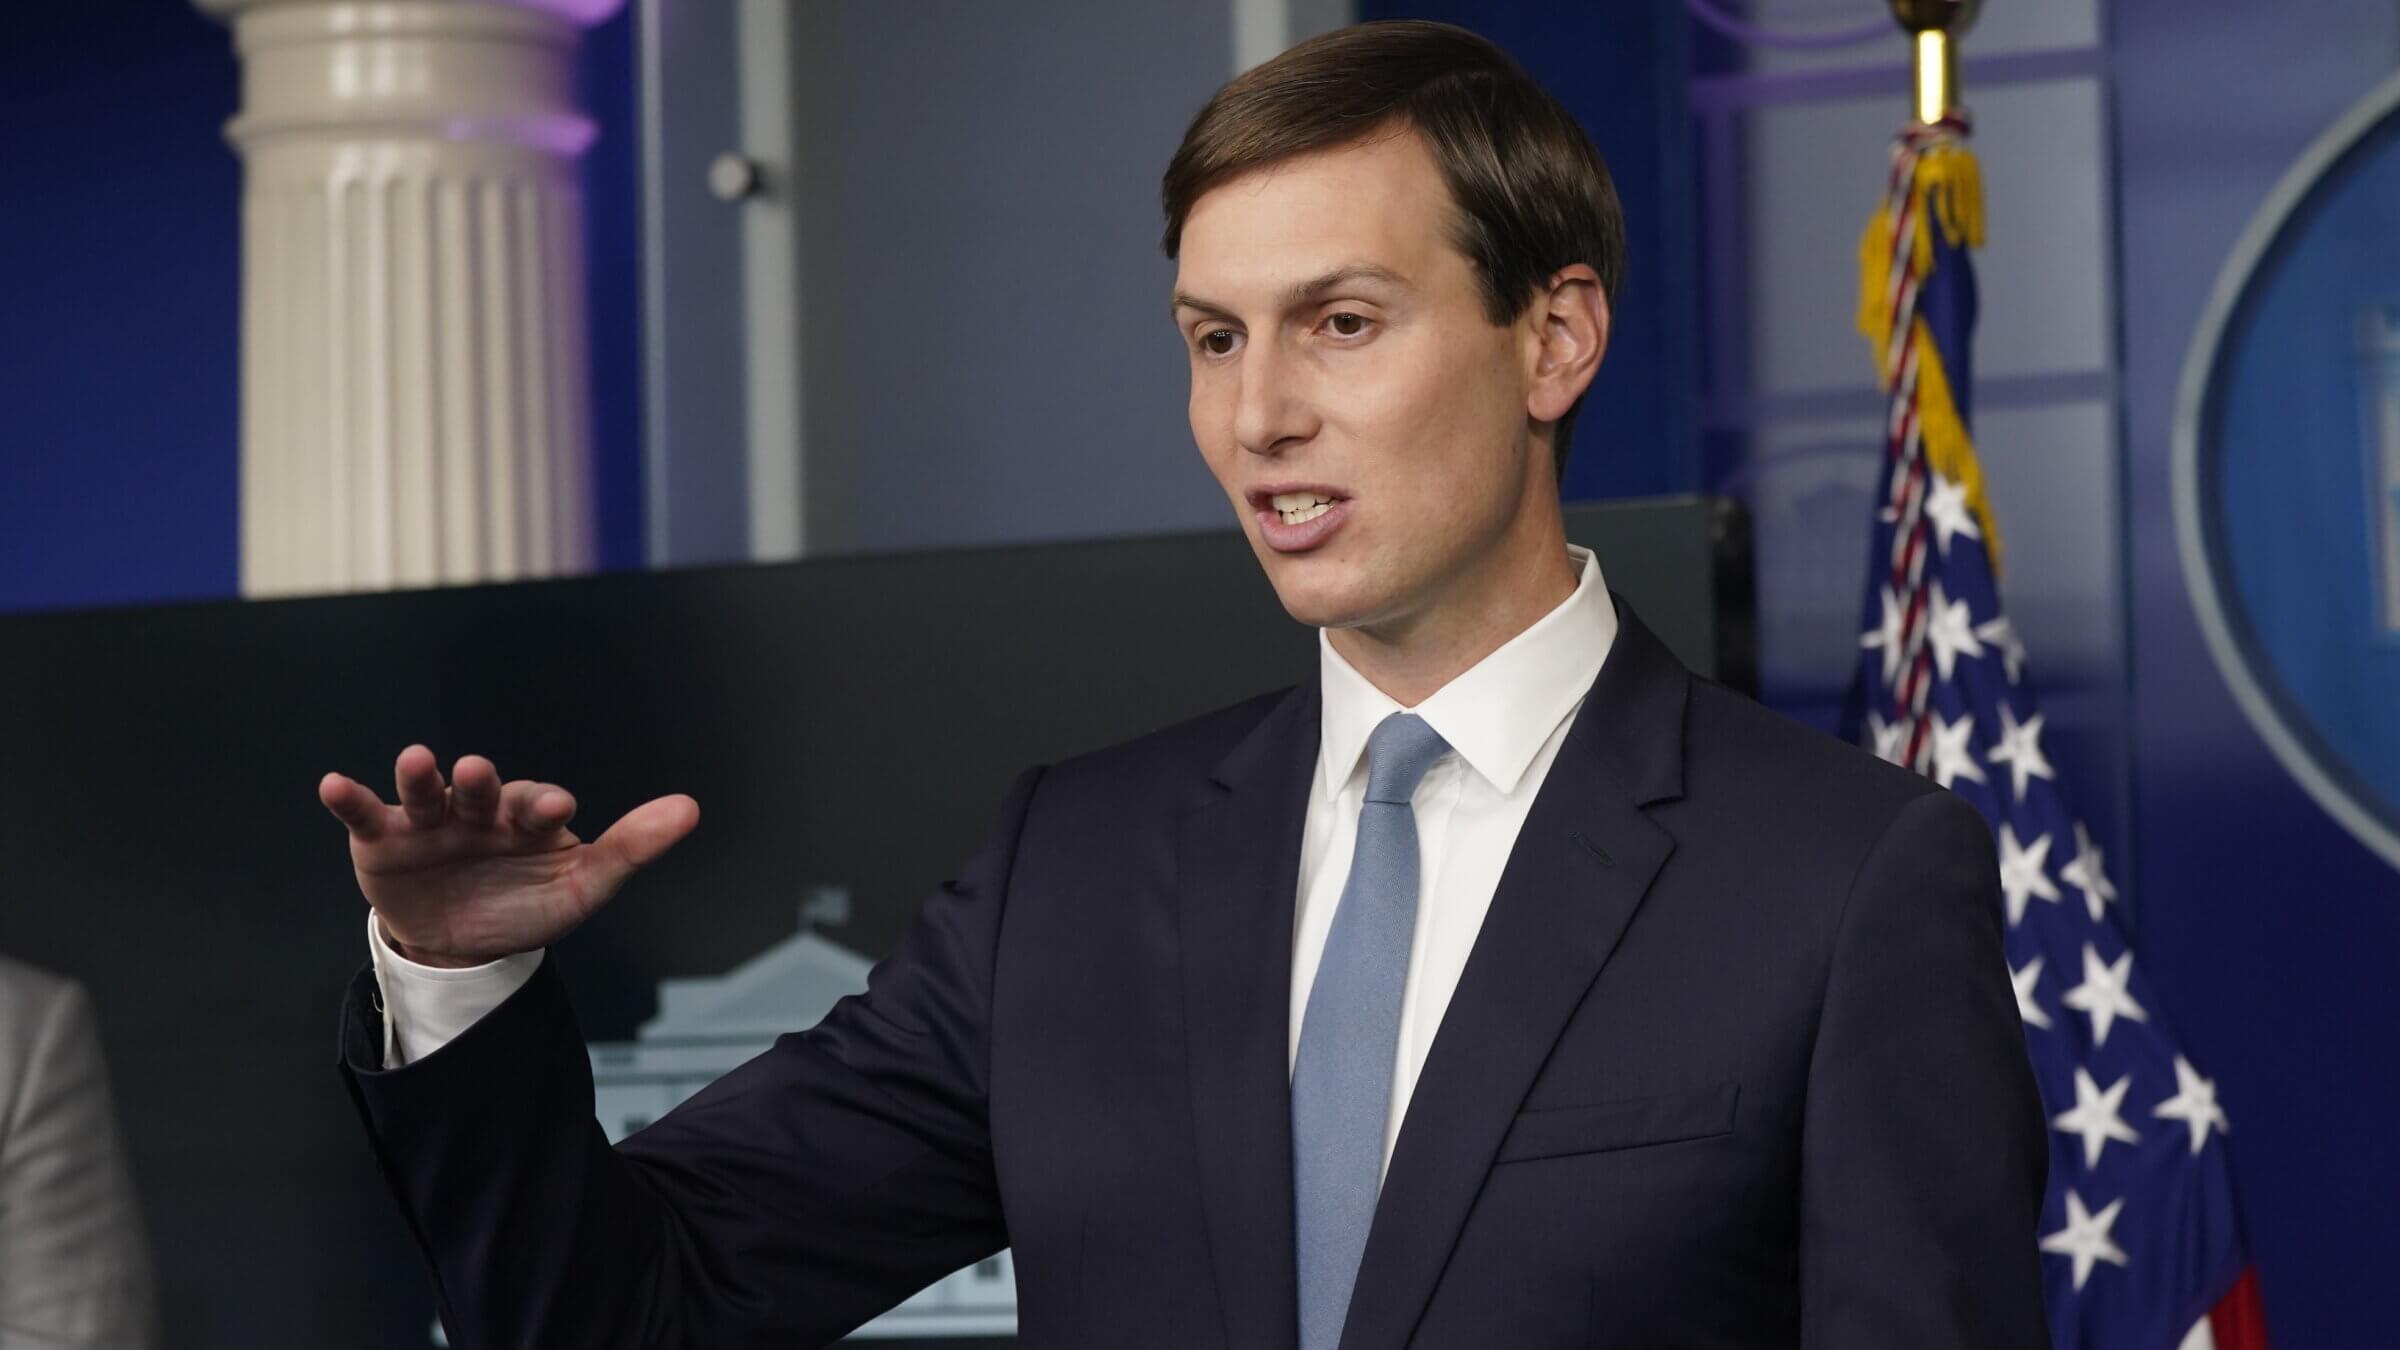 Jared Kushner, senior White House adviser, speaks during a news conference in the James S. Brady Press Briefing Room at the White House in Washington, D.C. on Sept. 4, 2020. 